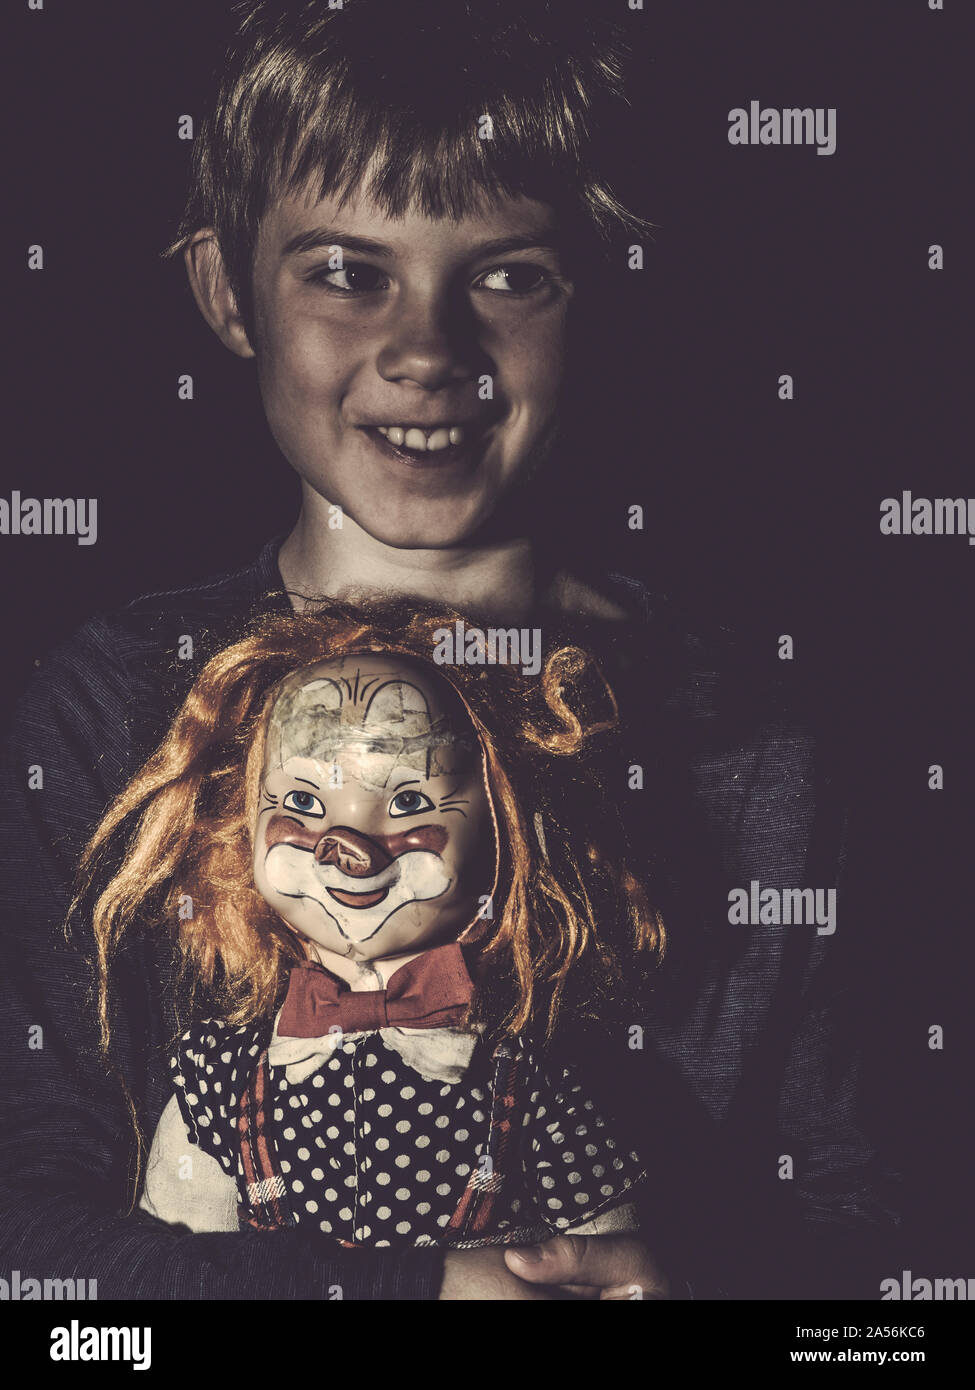 Photo of a creepy young boy holding an old doll for Halloween theme. Stock Photo